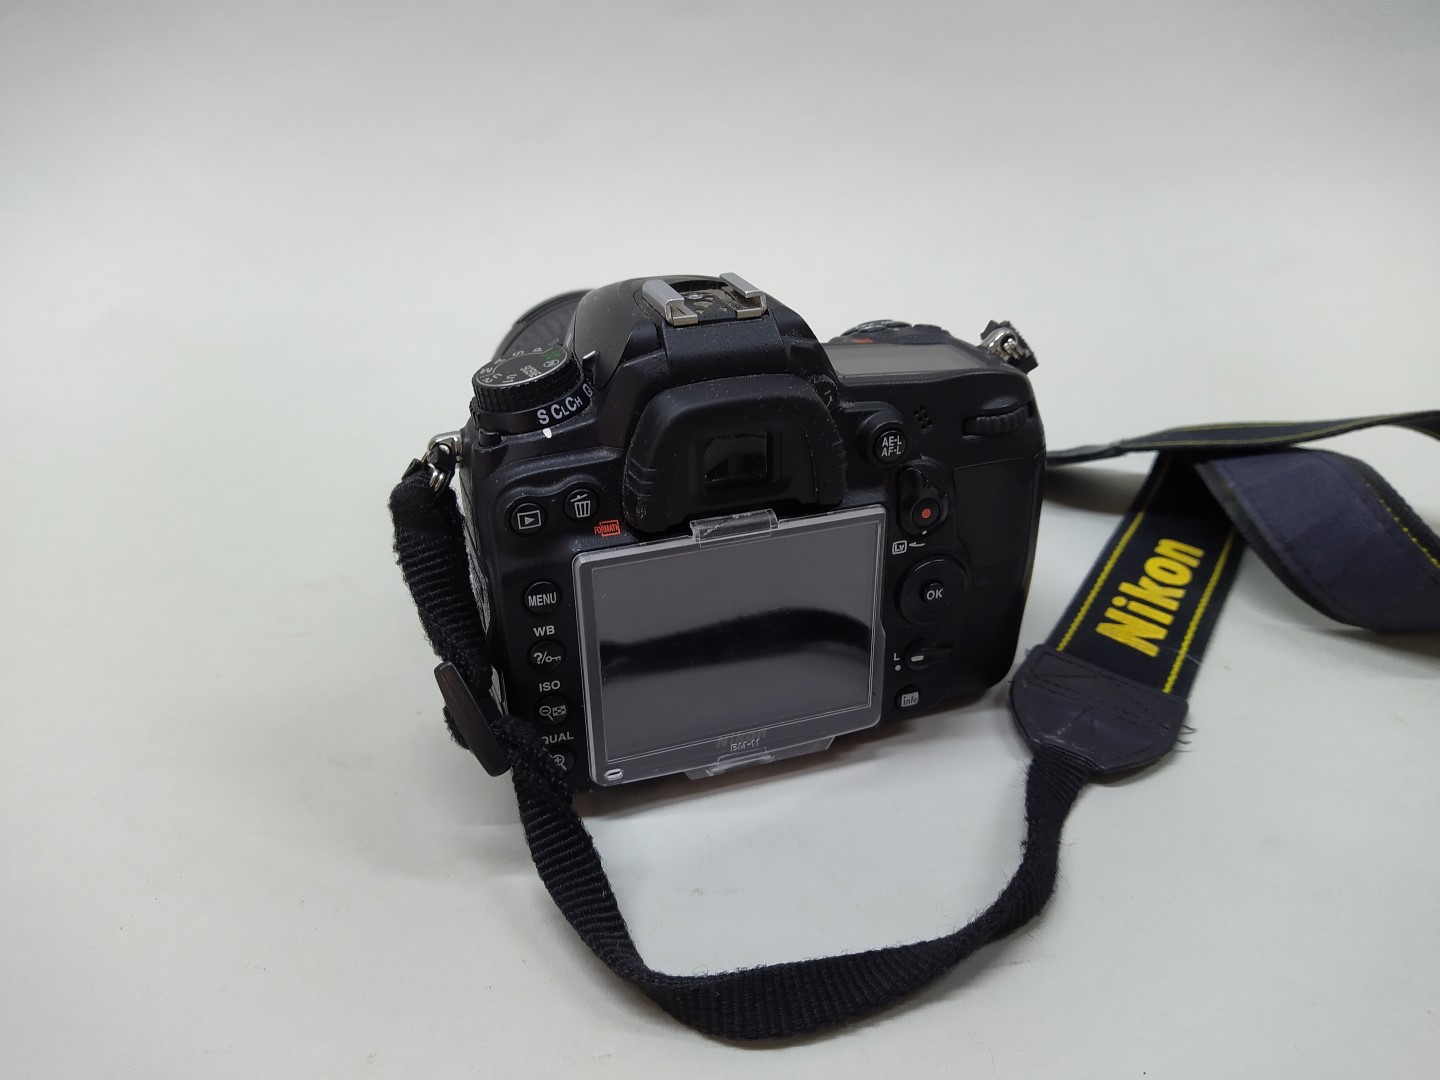 A Nikon D7000 camera body with a Nikon 18-77mm lens and charger in original box - Image 3 of 3